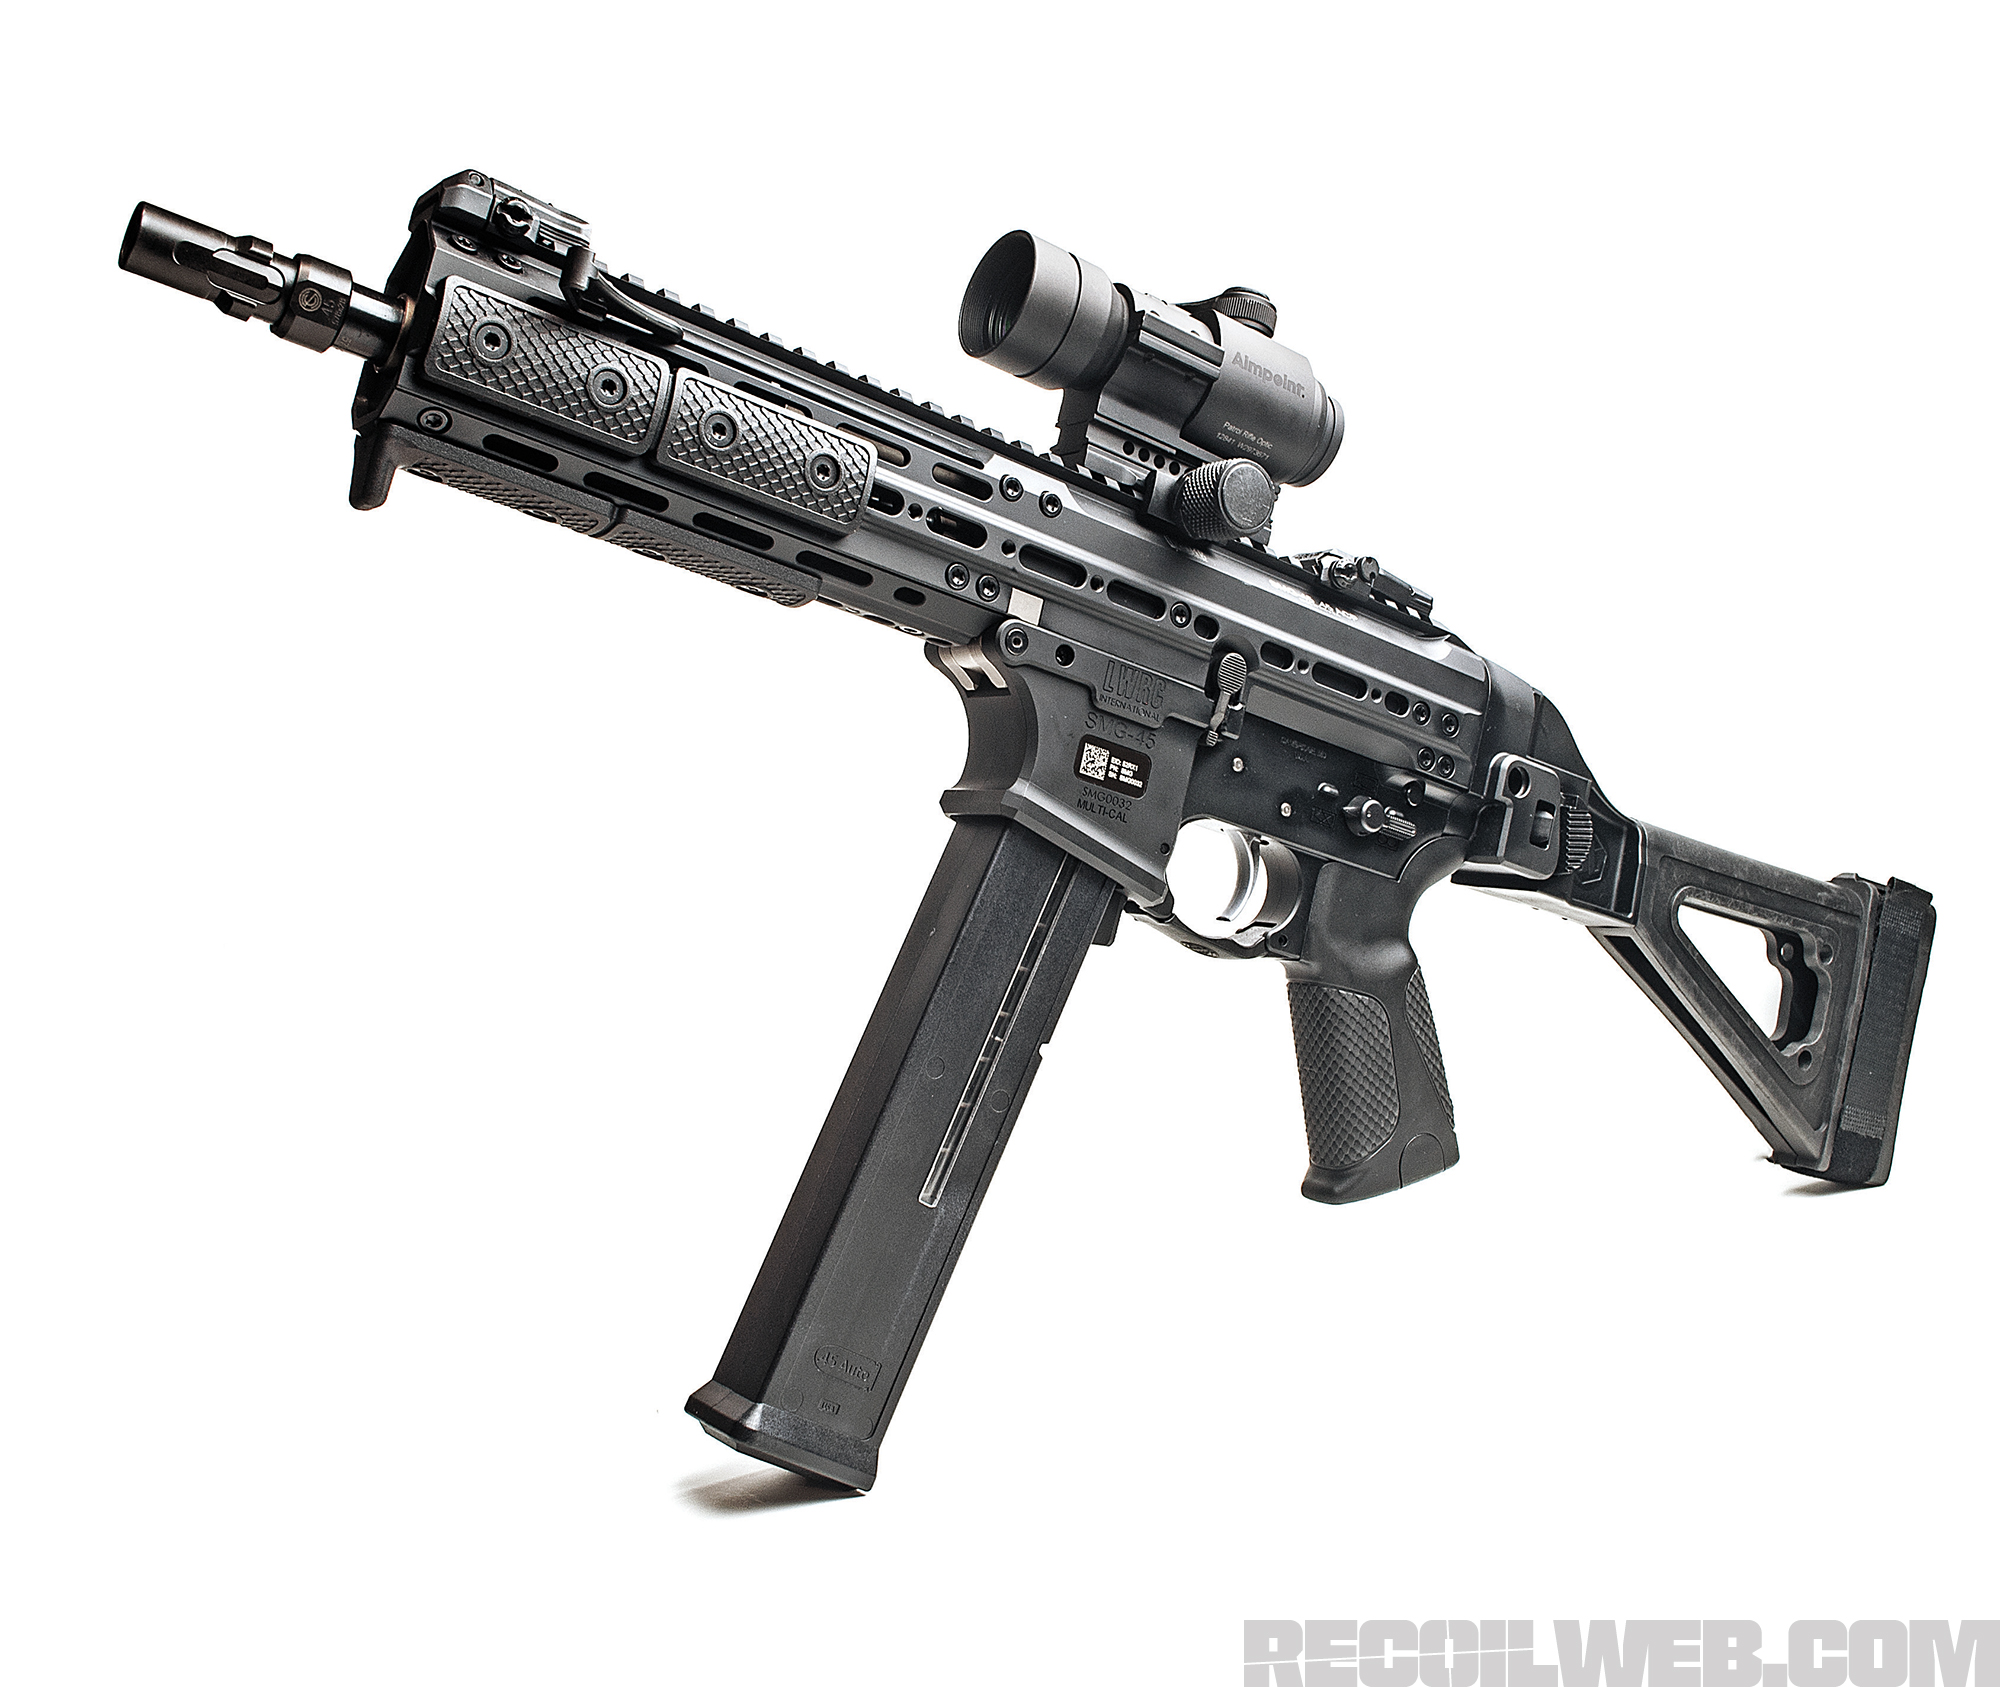 LWRCI’s New Short Recoil/Delayed Blowback SMG-45 Is a Fresh Take On the Sub...